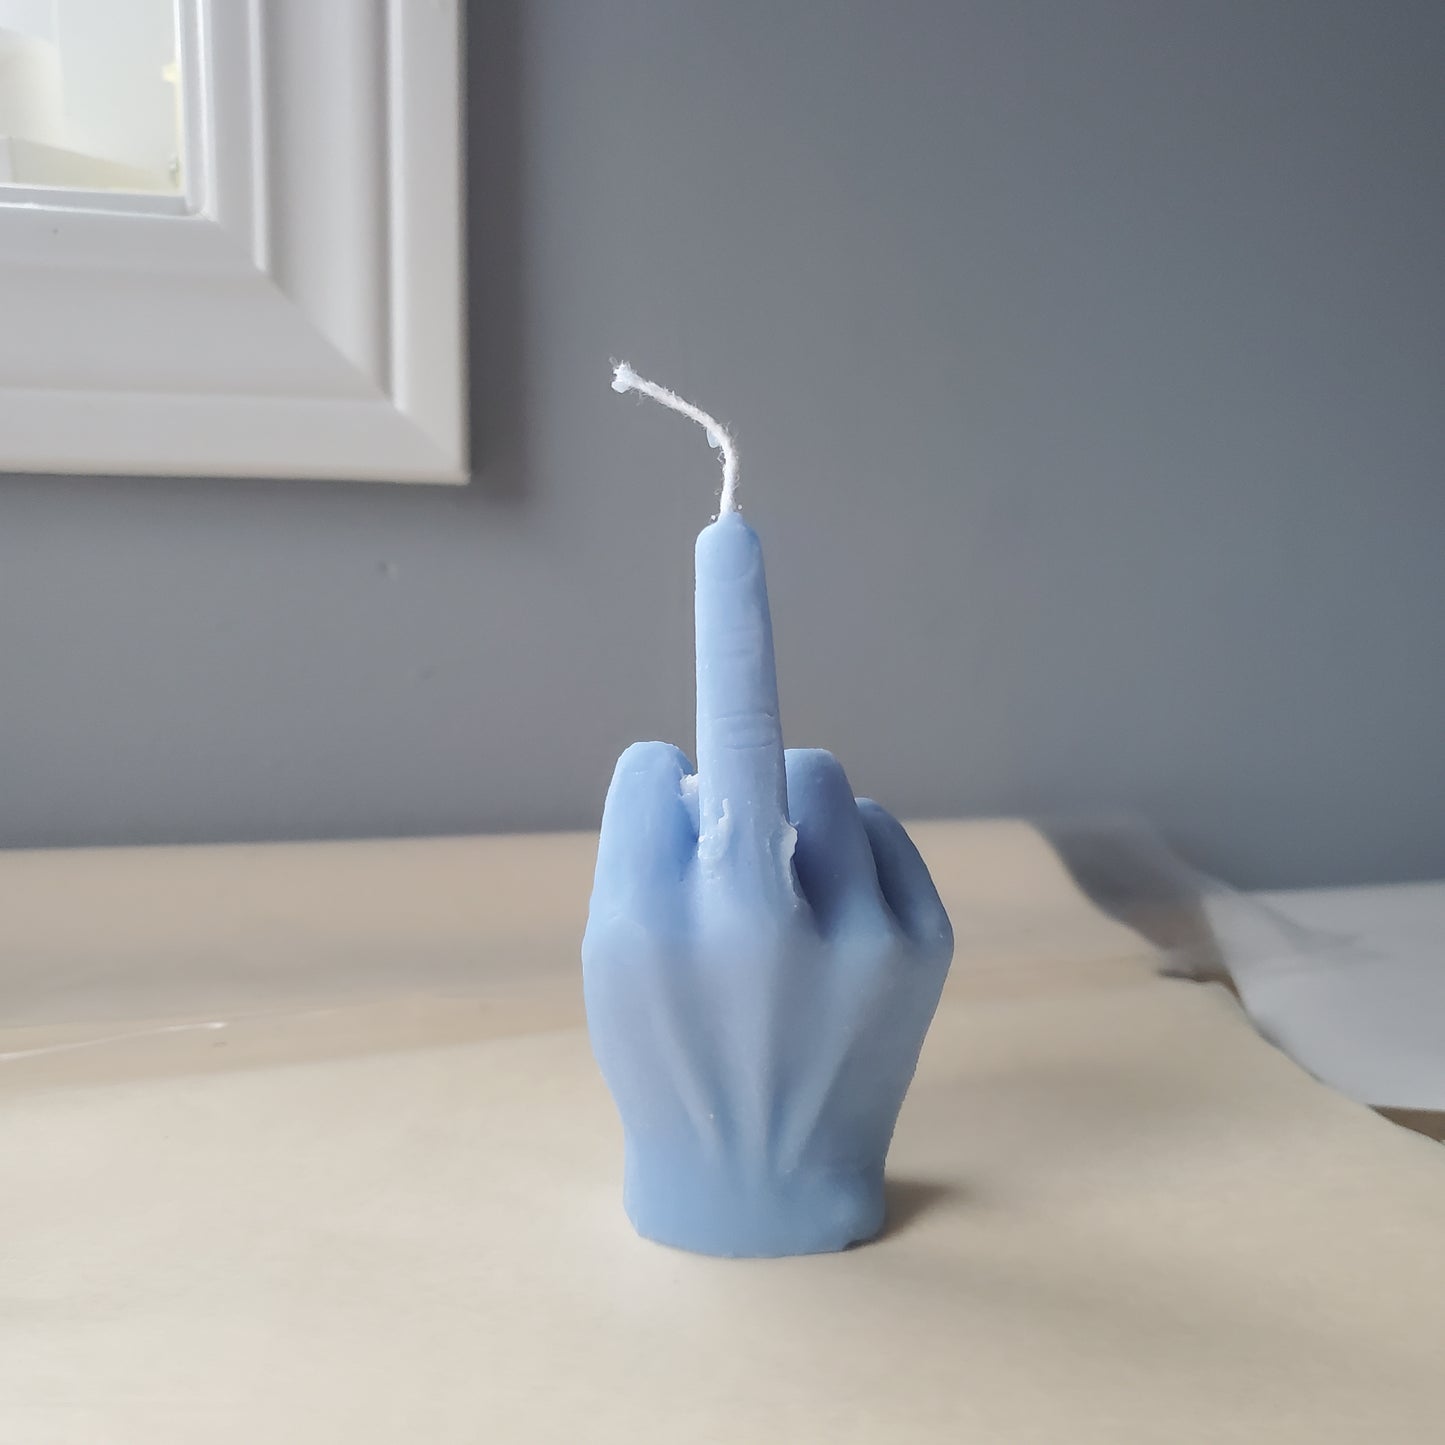 Middle finger candle